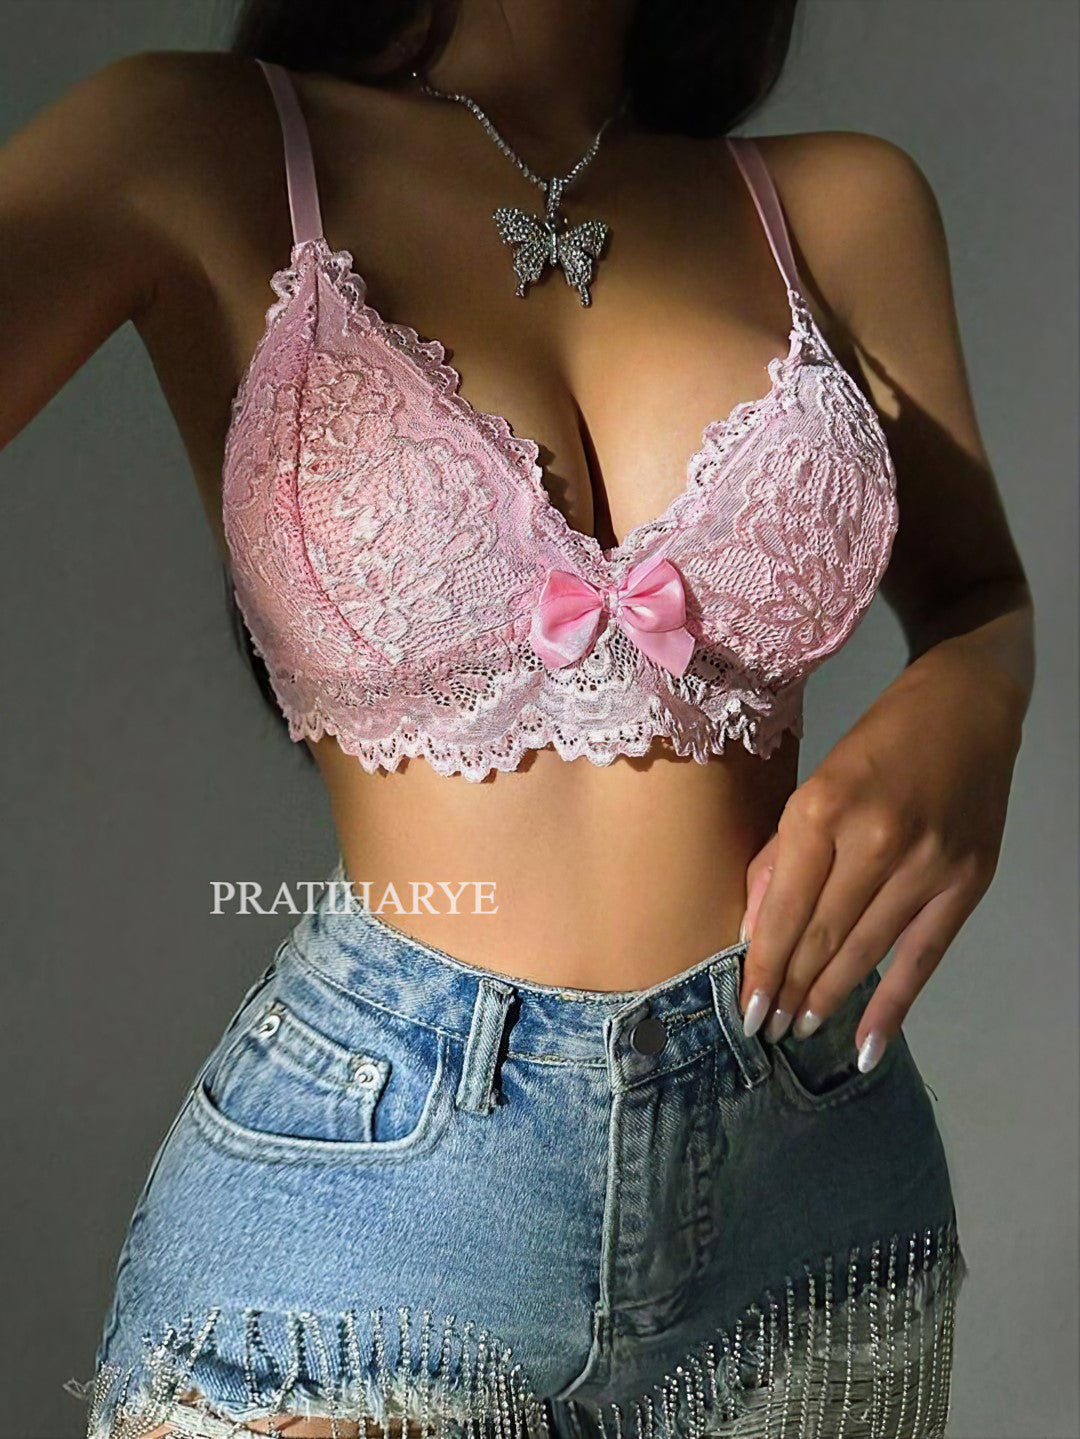 Butterfly floral Lace Lingerie - Bow Front Floral Lace Bra - Butterfly Shaped Wireless Bralette Underwear 